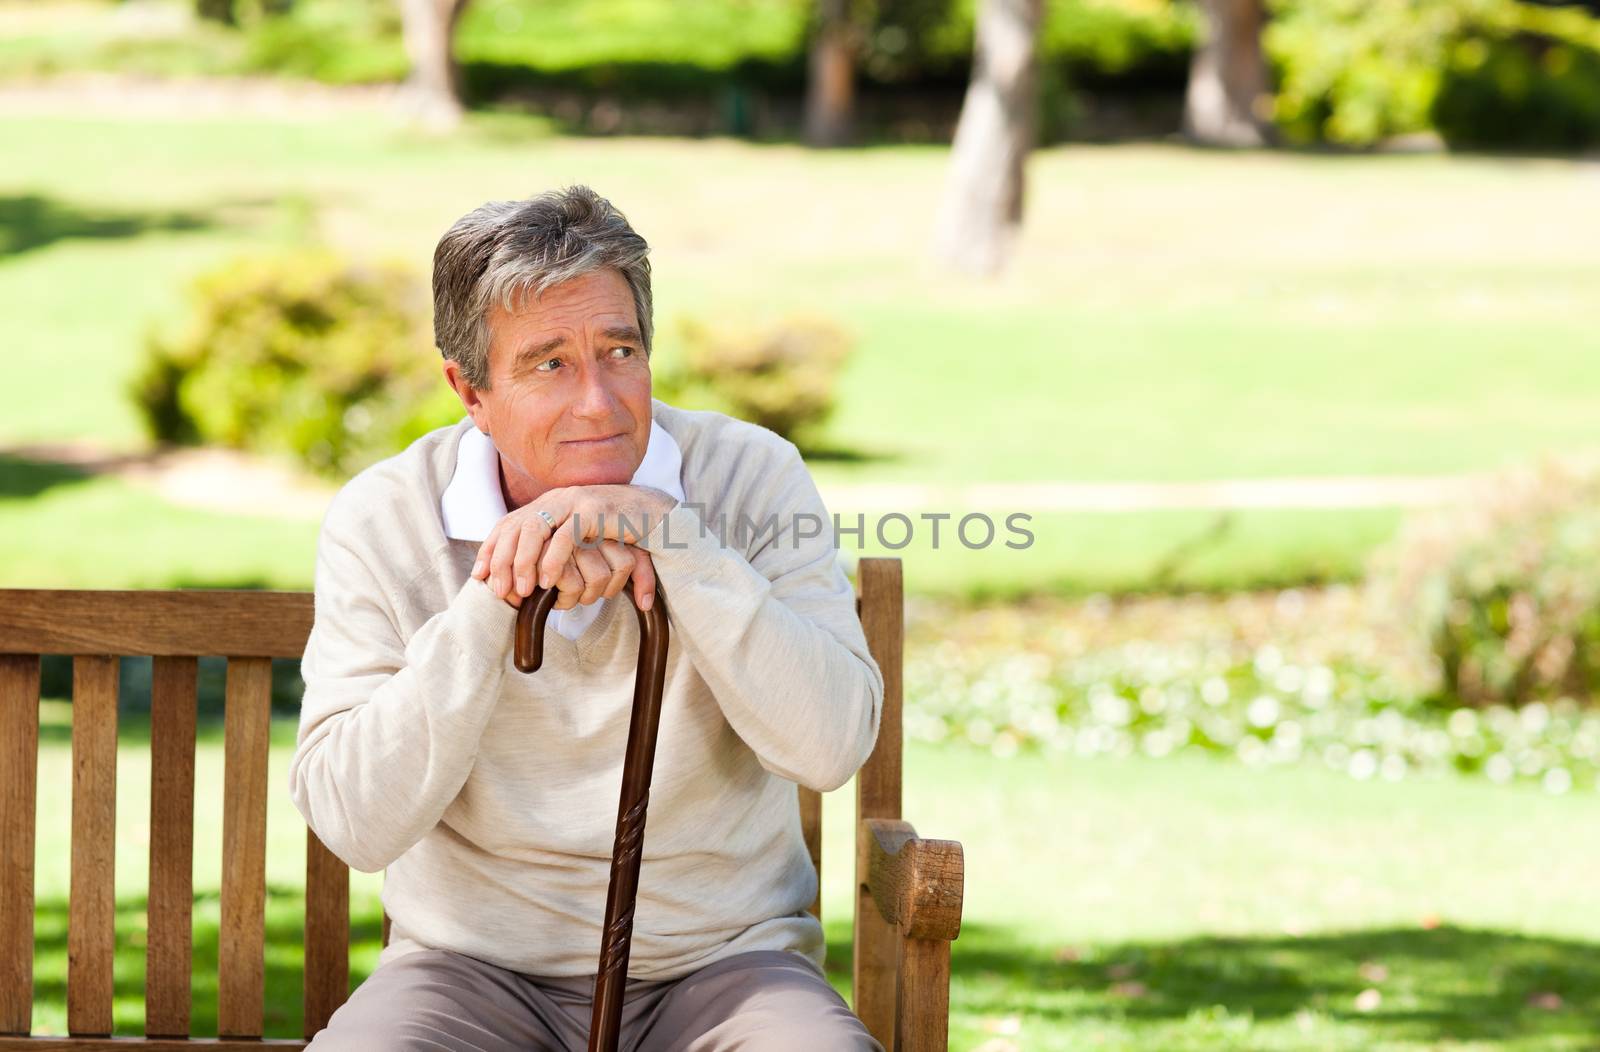 Elderly man with his walking stick during the summer